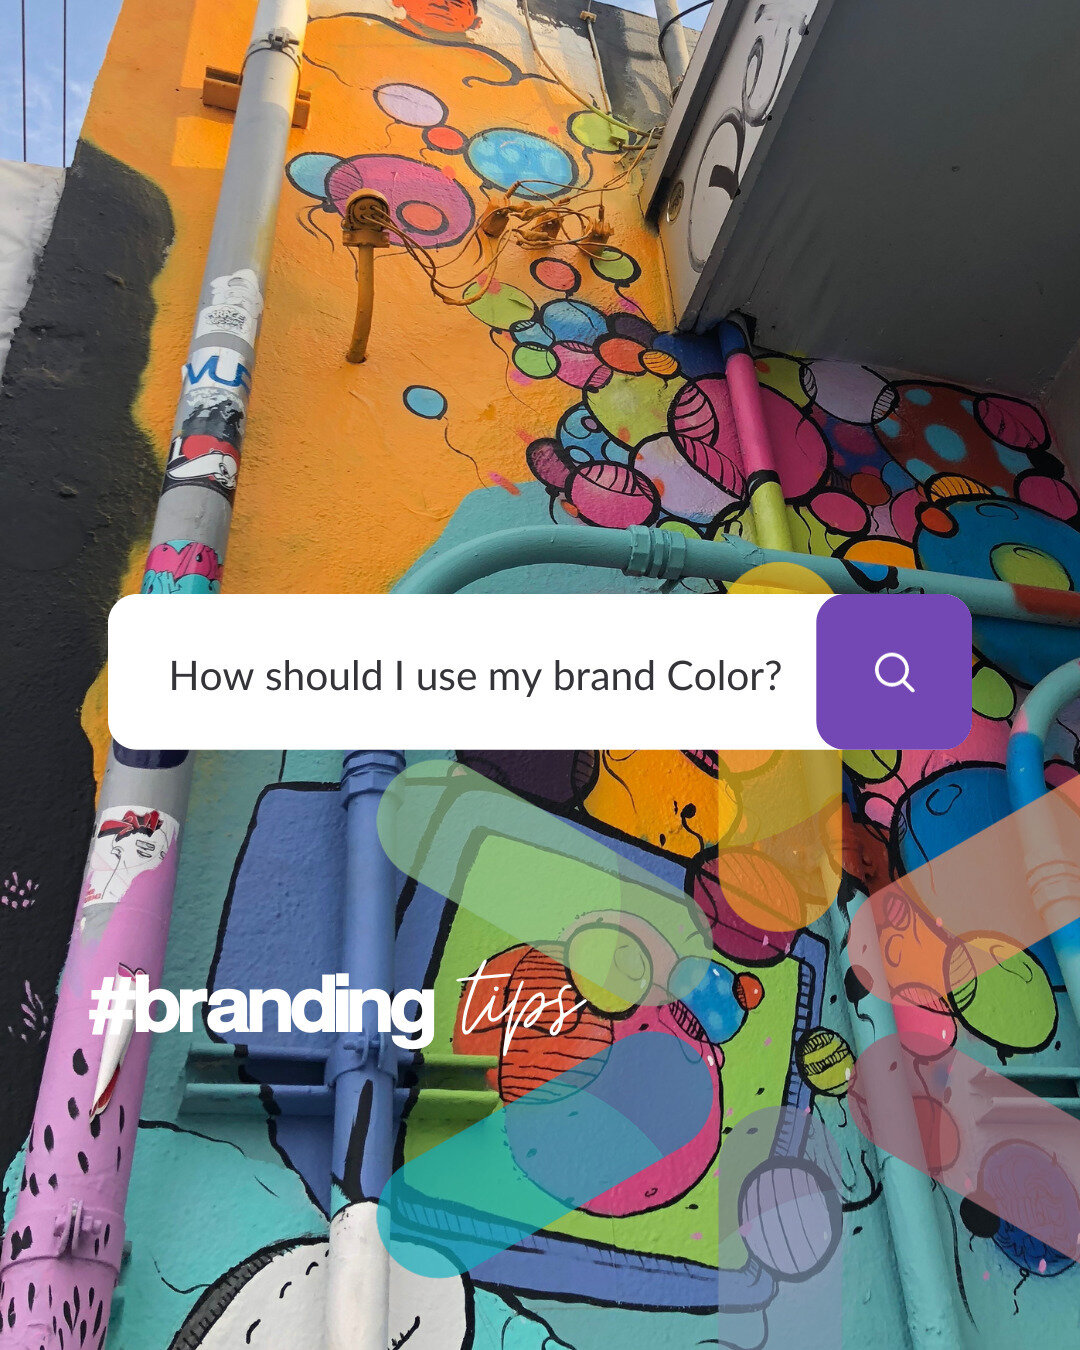 Your brand colors? They're not just a pretty face.
They SCREAM your brand's personality!
They're the silent ambassadors of your brand. 🕵♀

USE THEM WISELY.
Bold on your website.
Consistent in your product.
Unforgettable in your marketing.

YOUR COLO